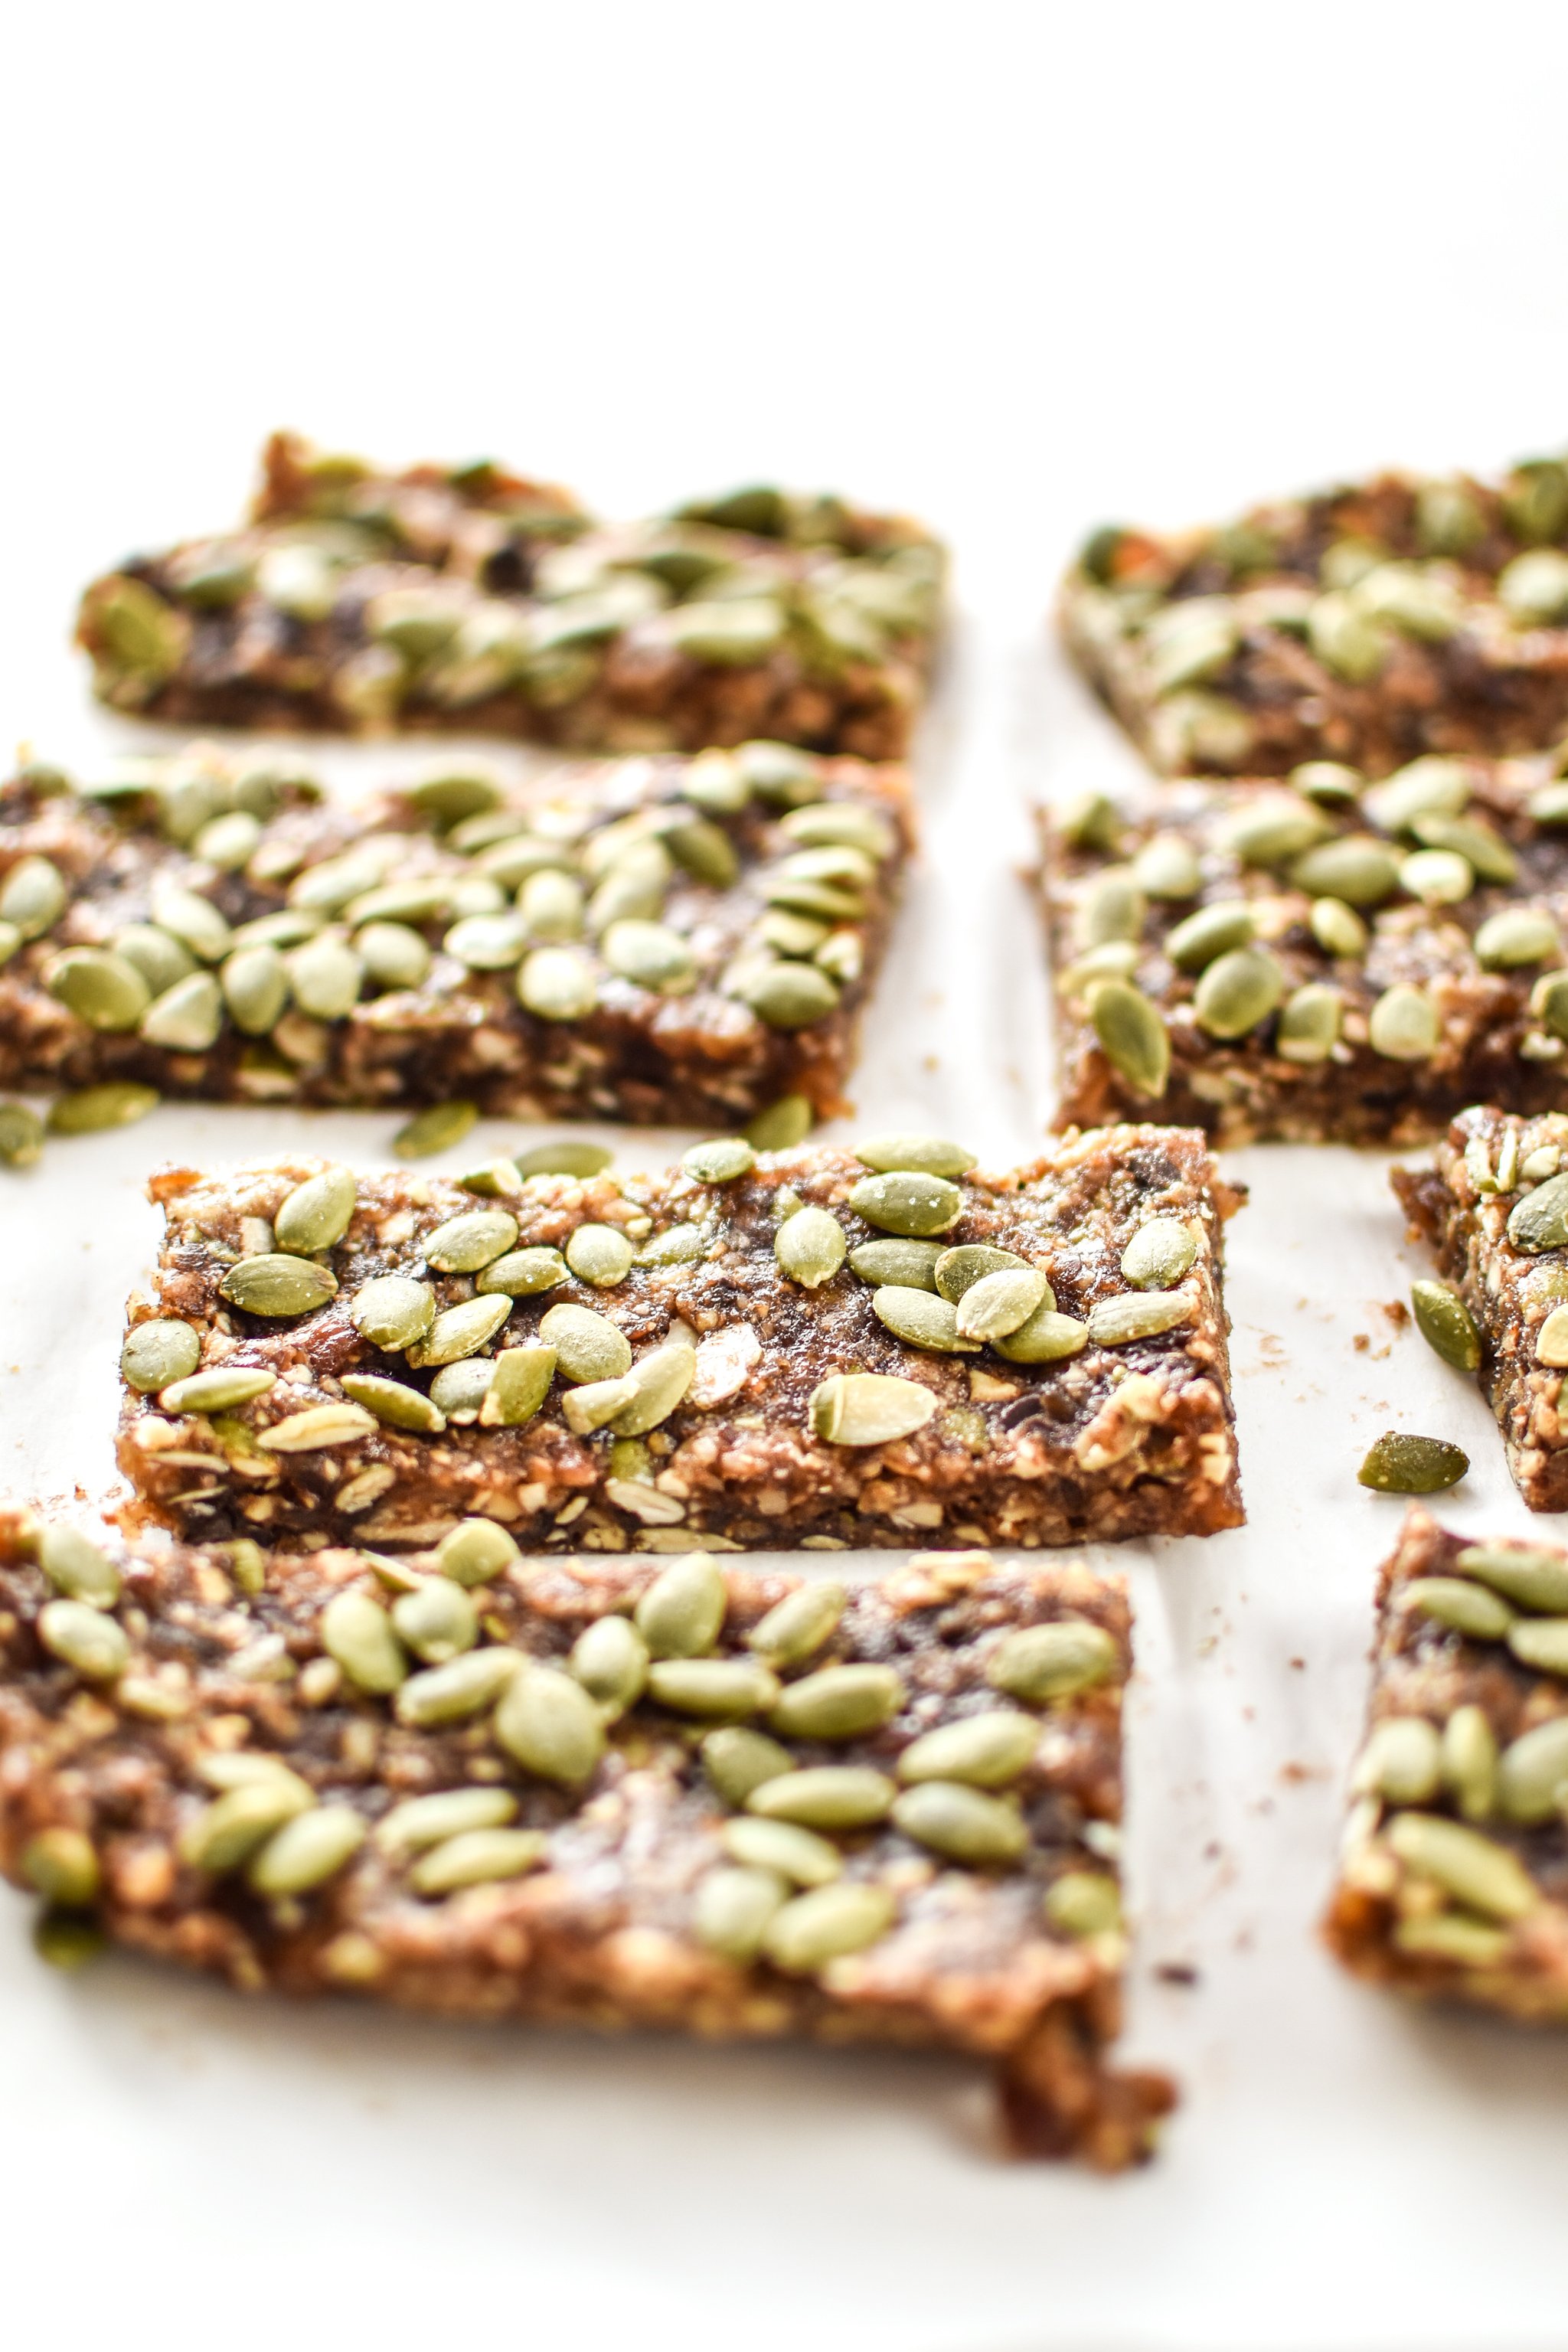 No-Bake Pumpkin Spice Date Nut Bars - Naturally sweetened with dates and full of pumpkin seeds! Homemade bars with that pumpkin spice life! - ProjectMealPlan.com